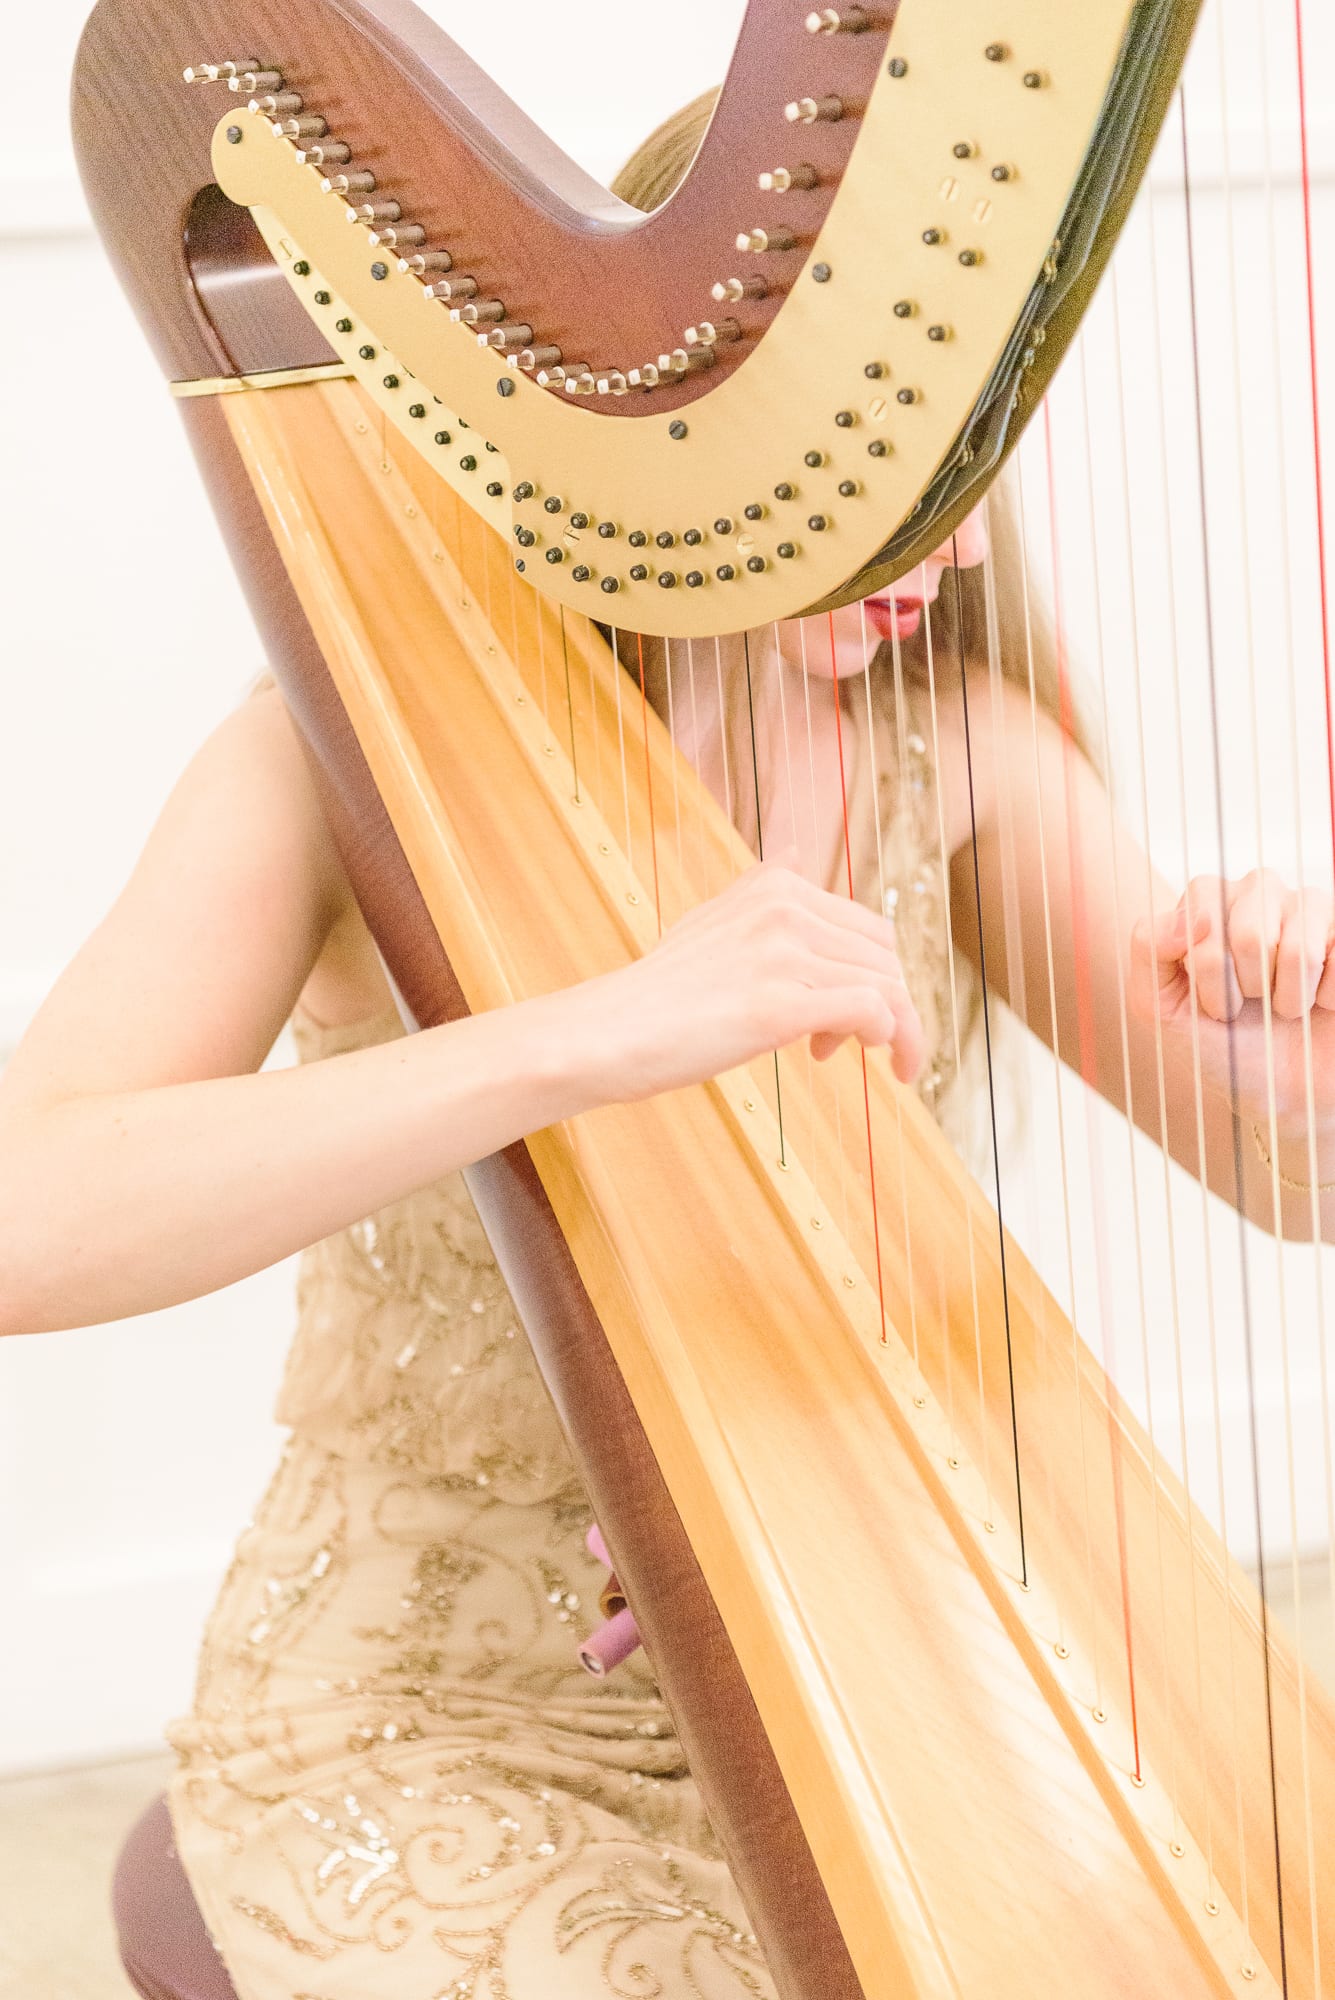 A harpist plays ceremony music as the bride walks down the aisle in the Distillery in Garner, NC.